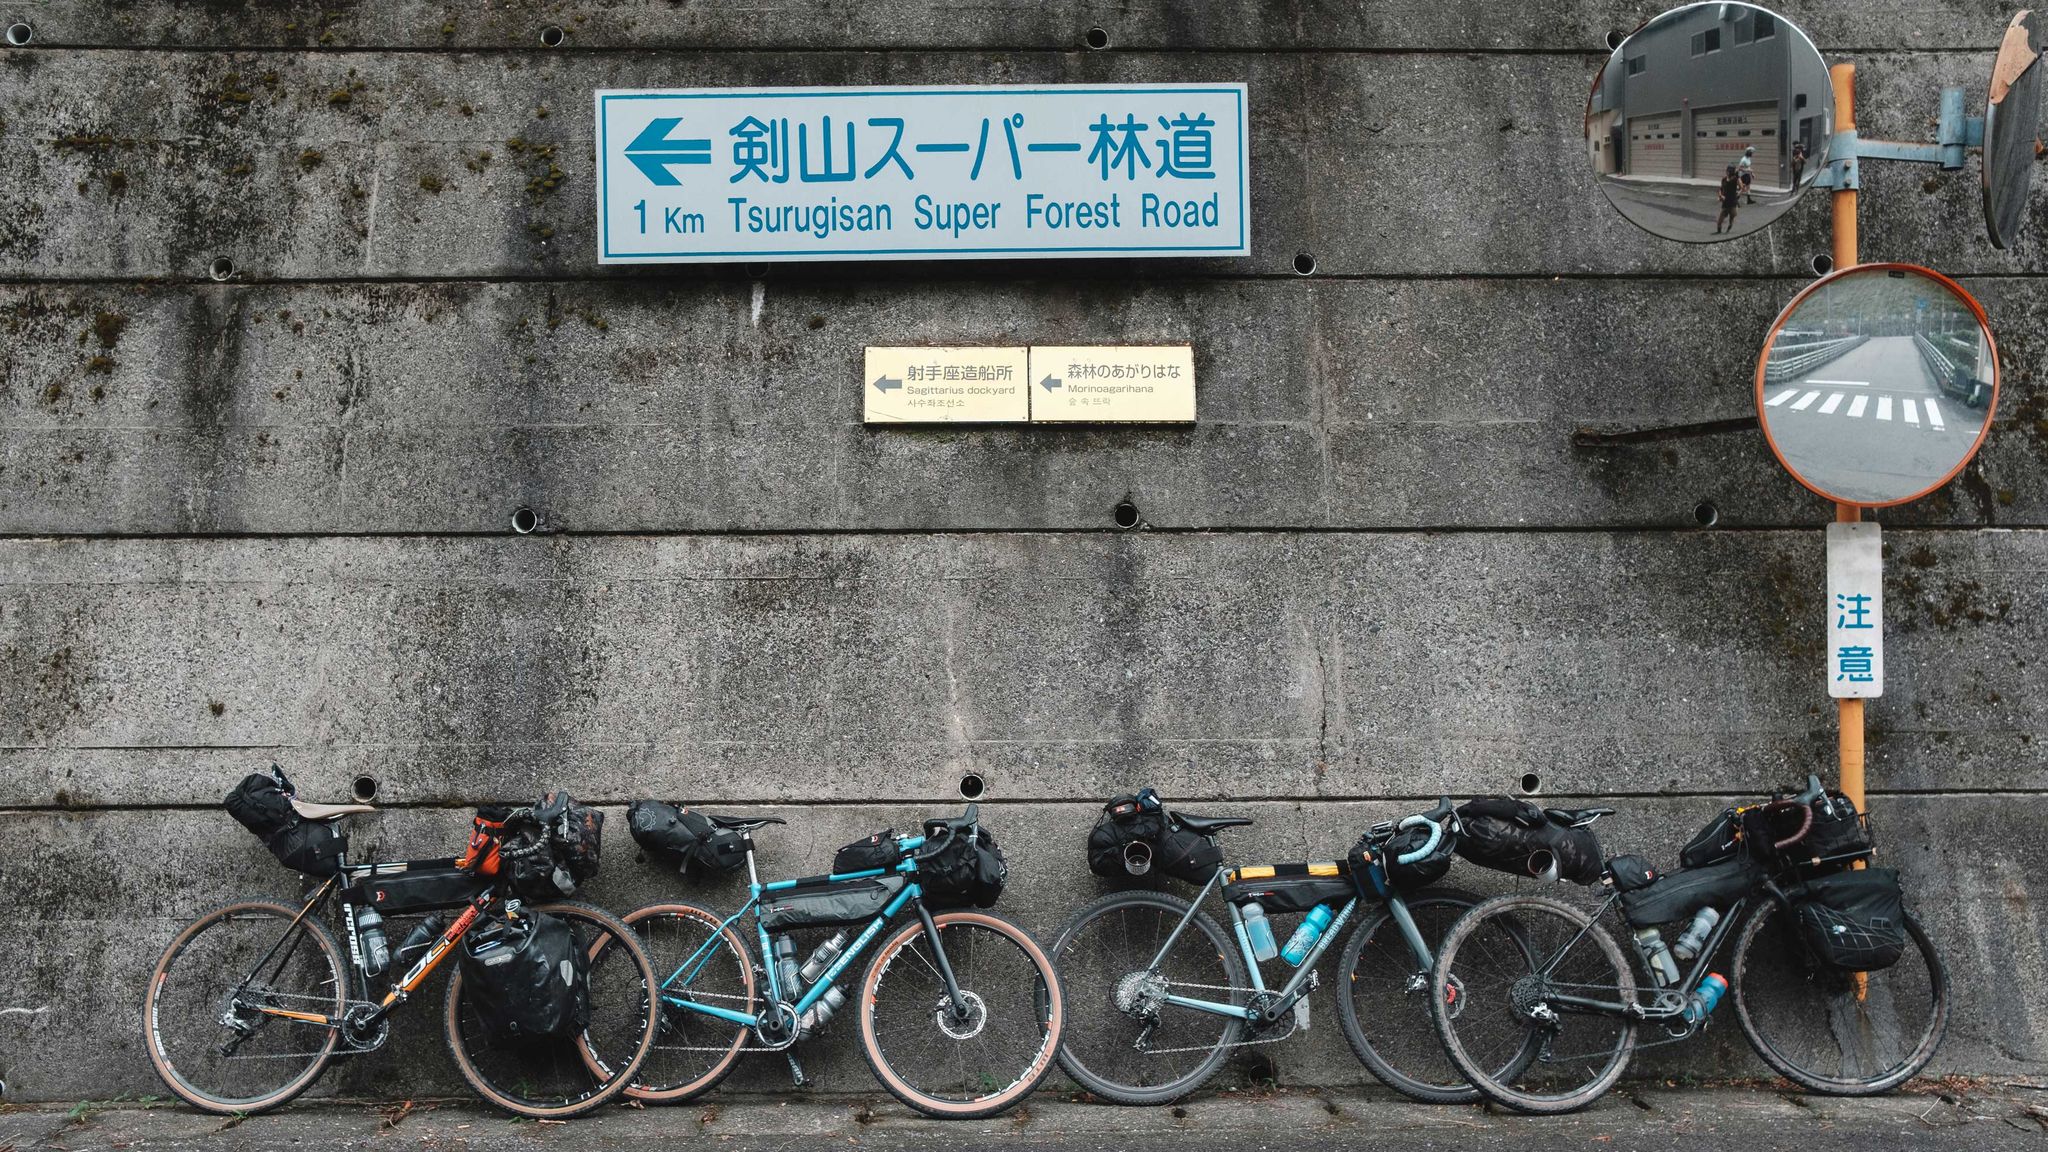 Cyclists bikes in Japan photographed in the summer of 2018.